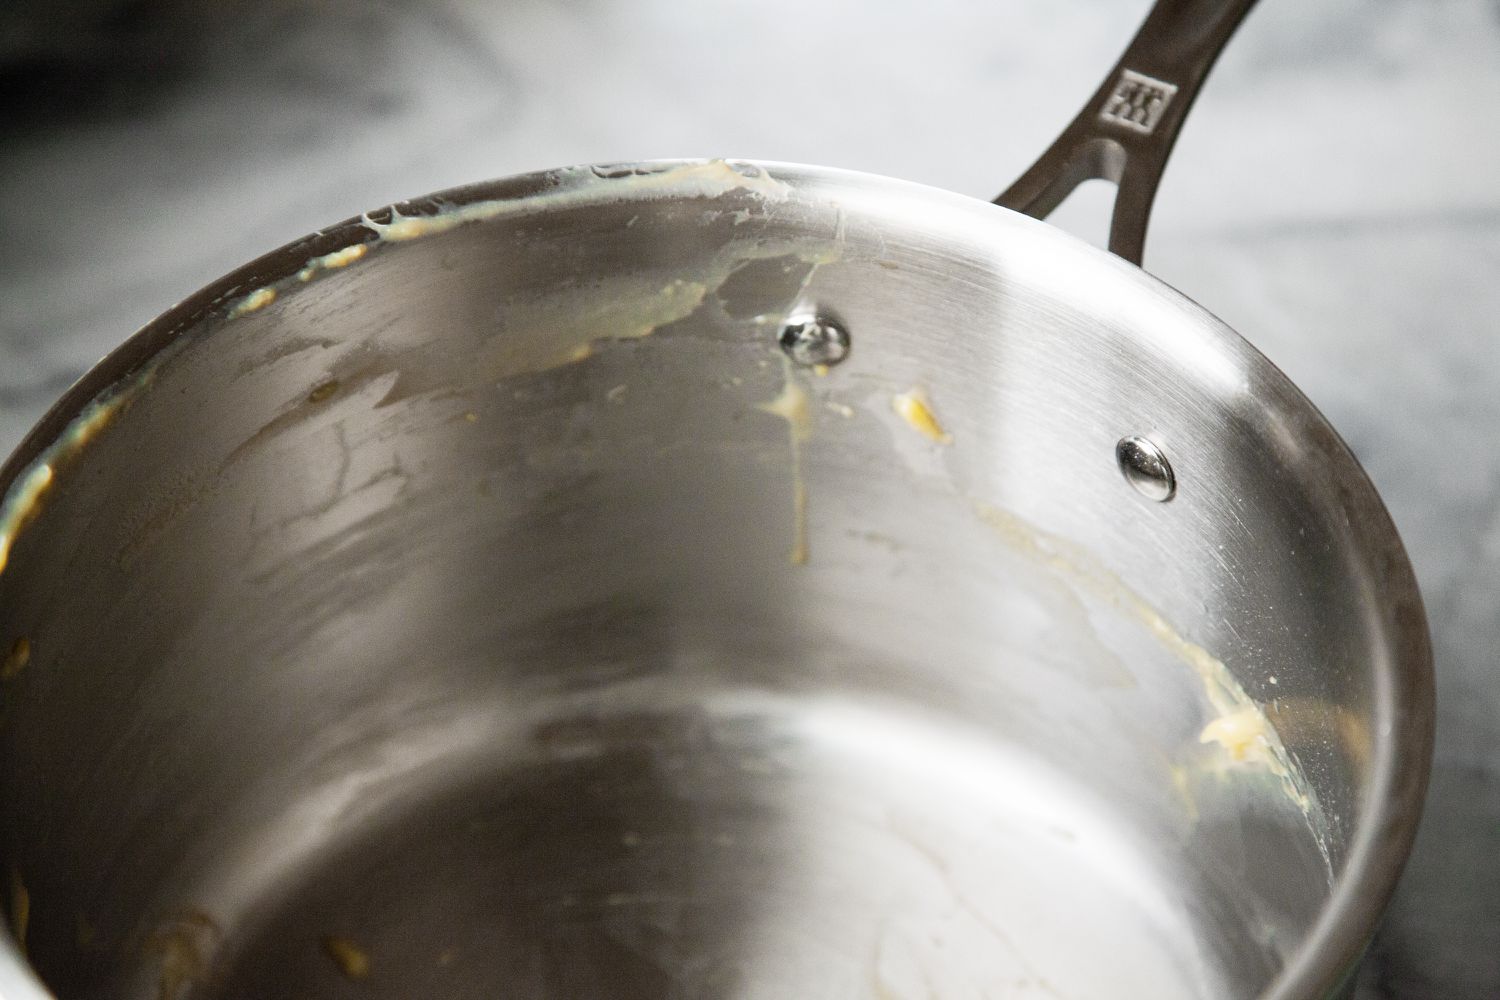 A closeup look at the interior of a stainless steel saucepan